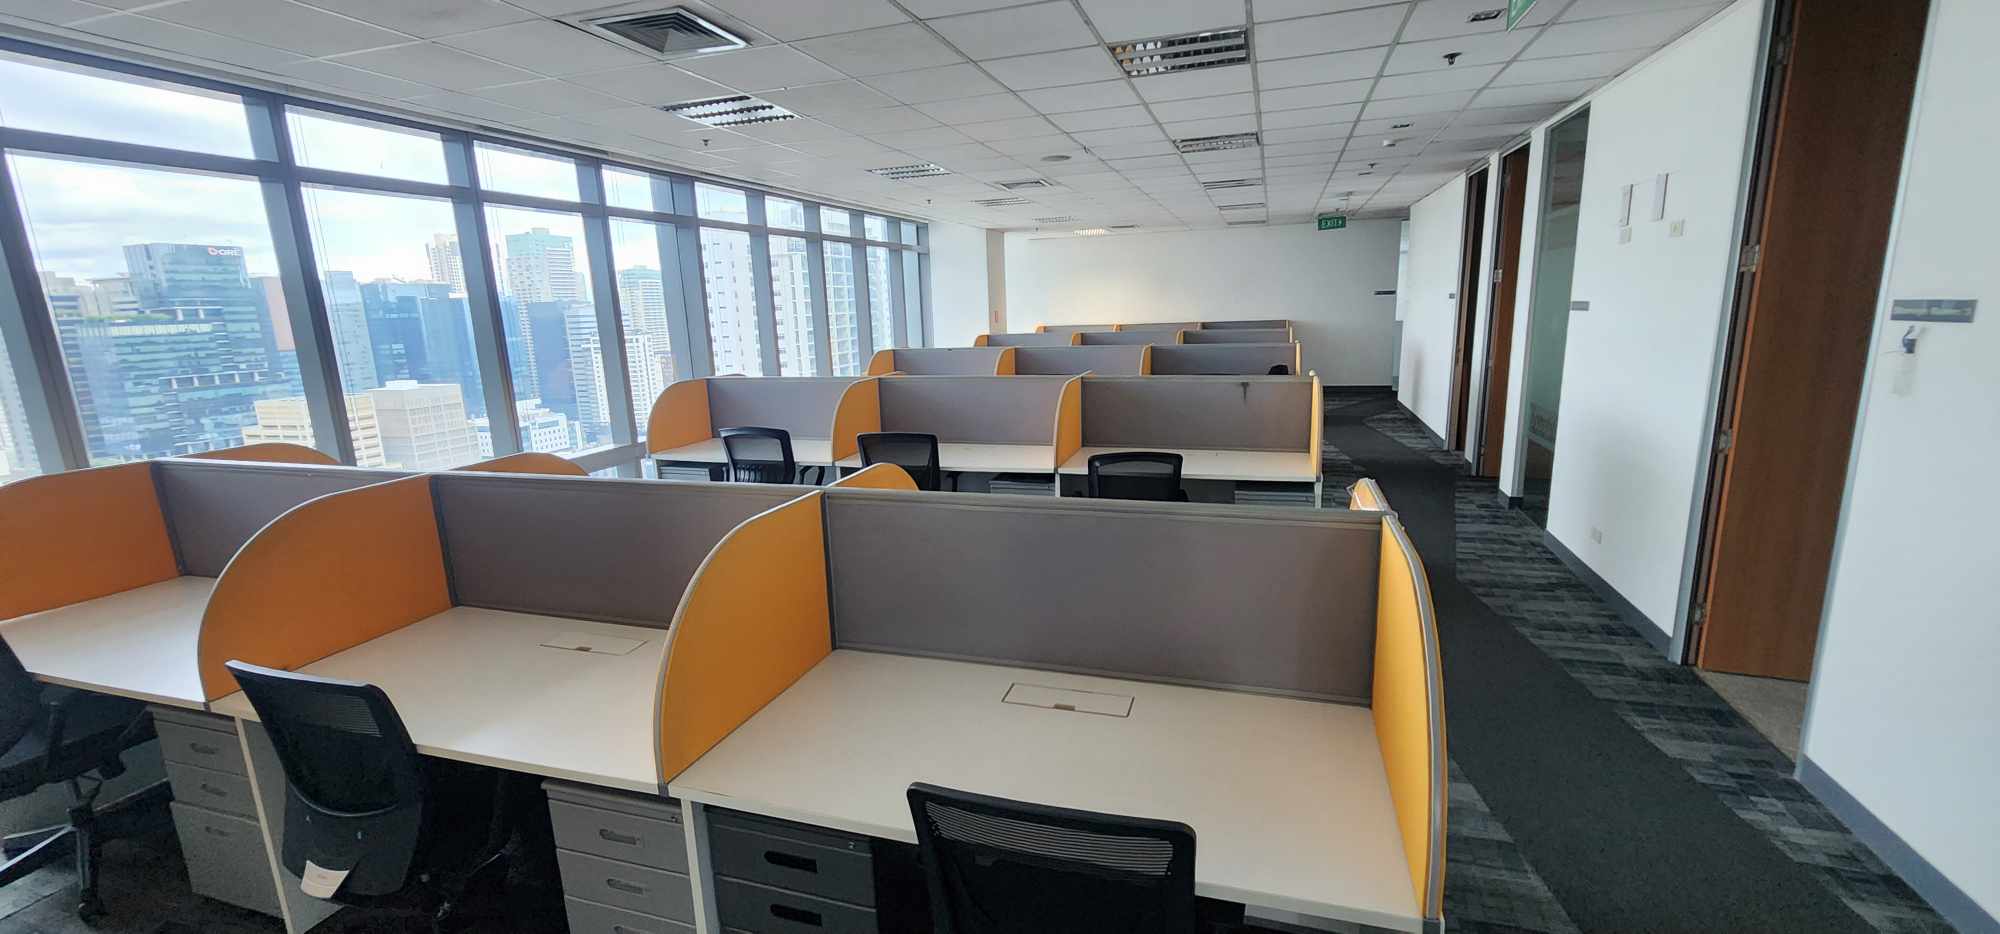 BGC Fully Fitted Furnished BPO Office Space for Lease Rent